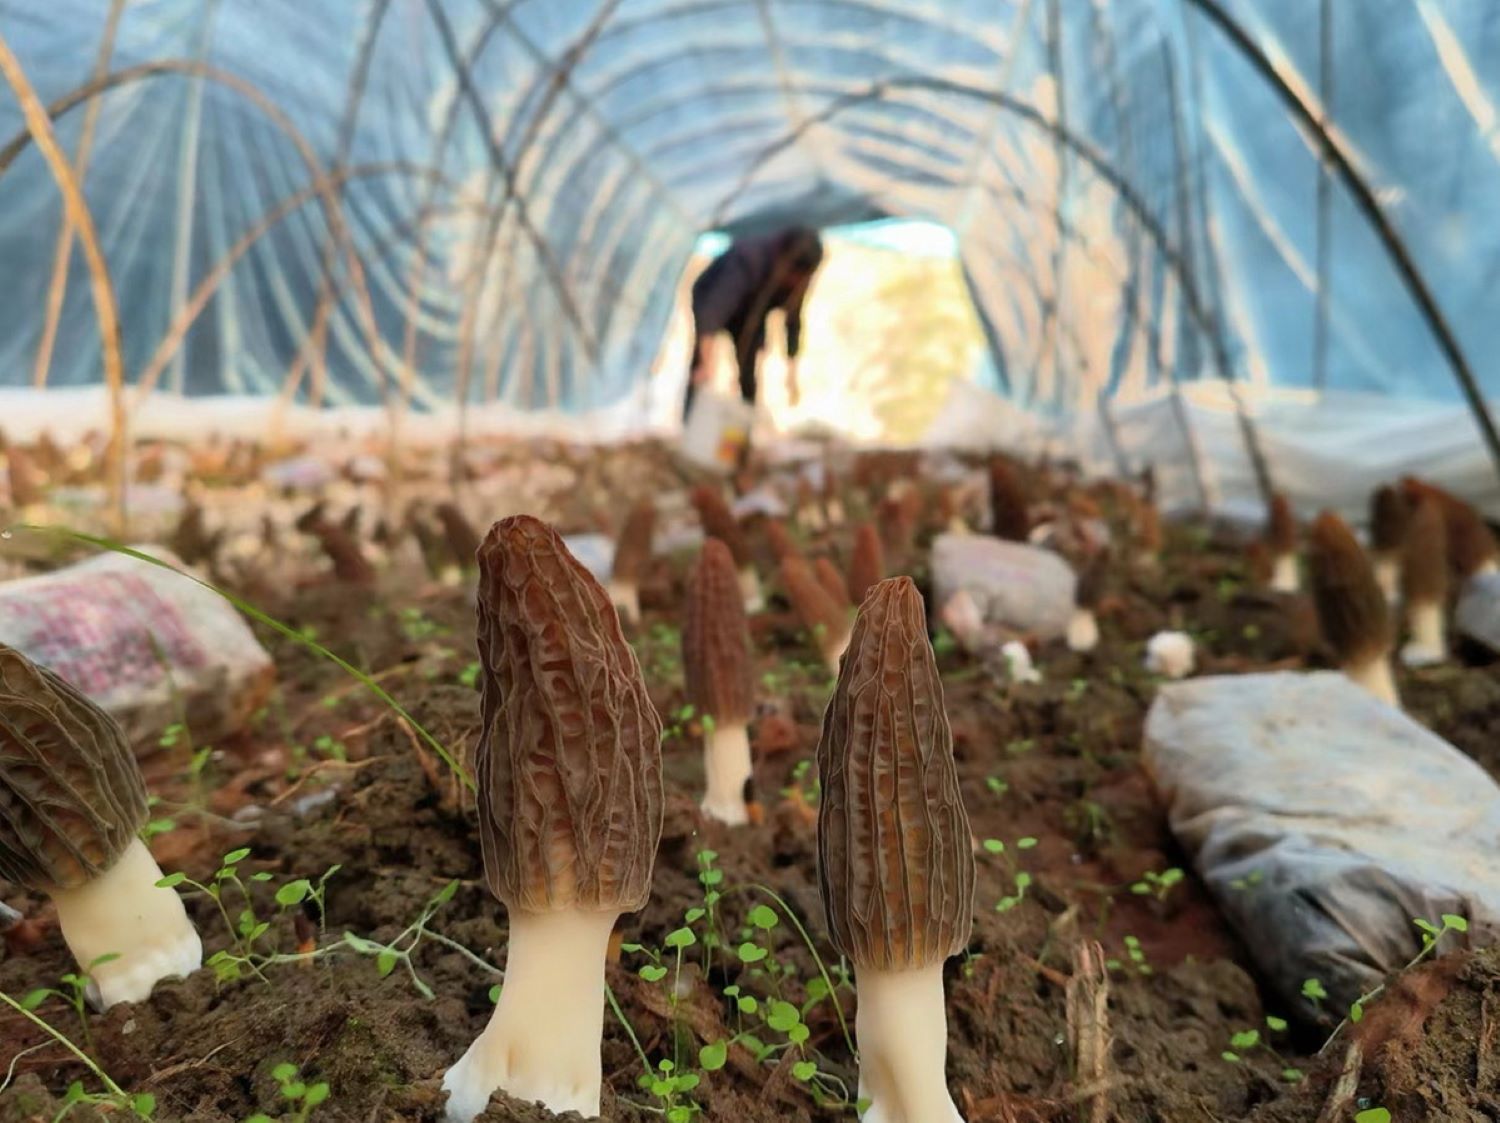 A grower takes care of edible fungi at a greenhouse in Yichang, Hubei province, in February.PhotoChina Daily